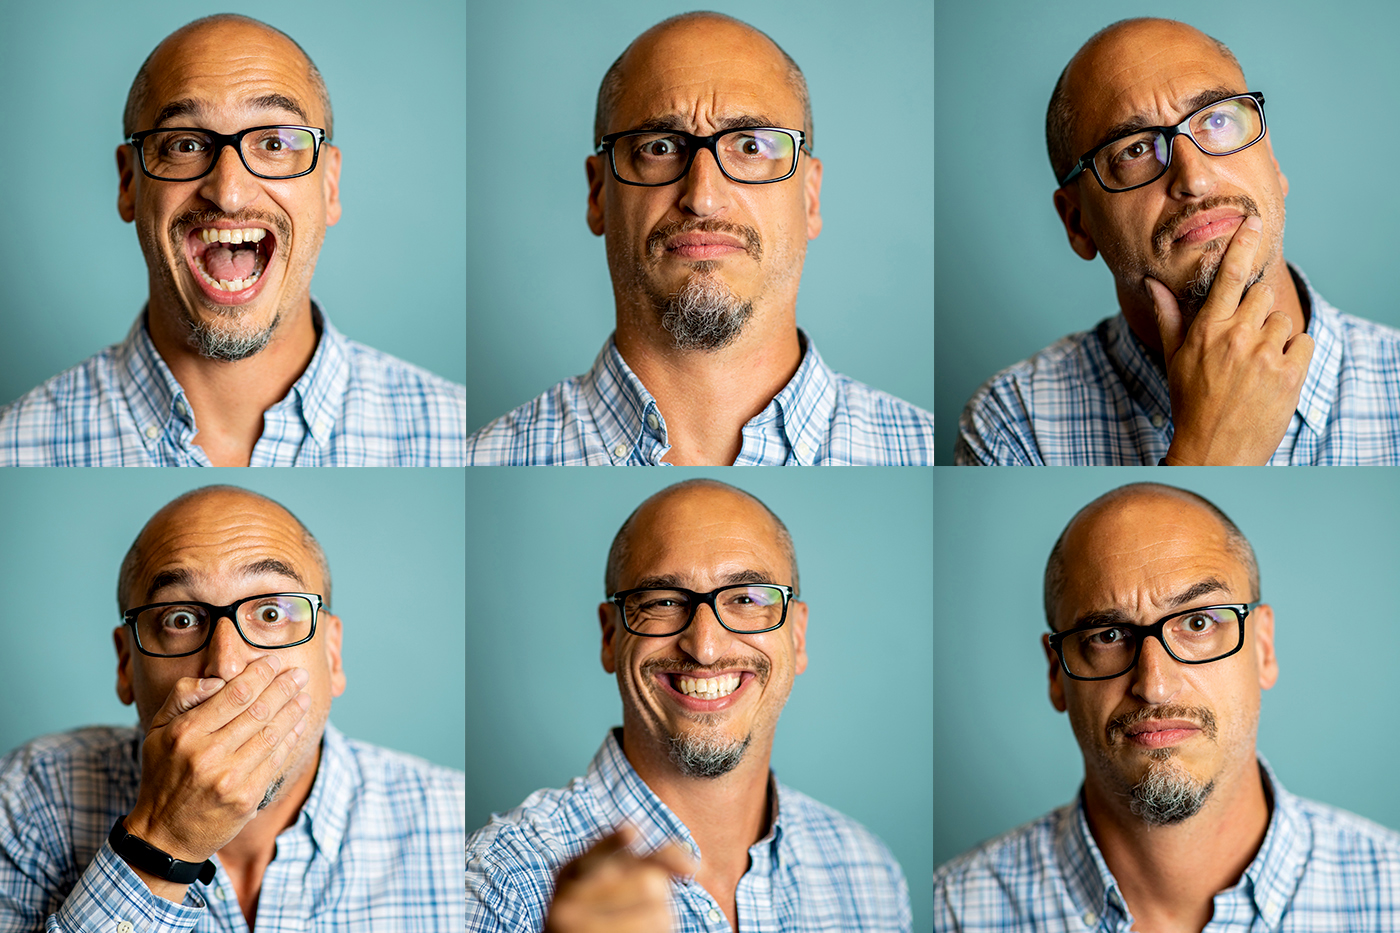 Man poses for 6 headshots with varying facial expressions